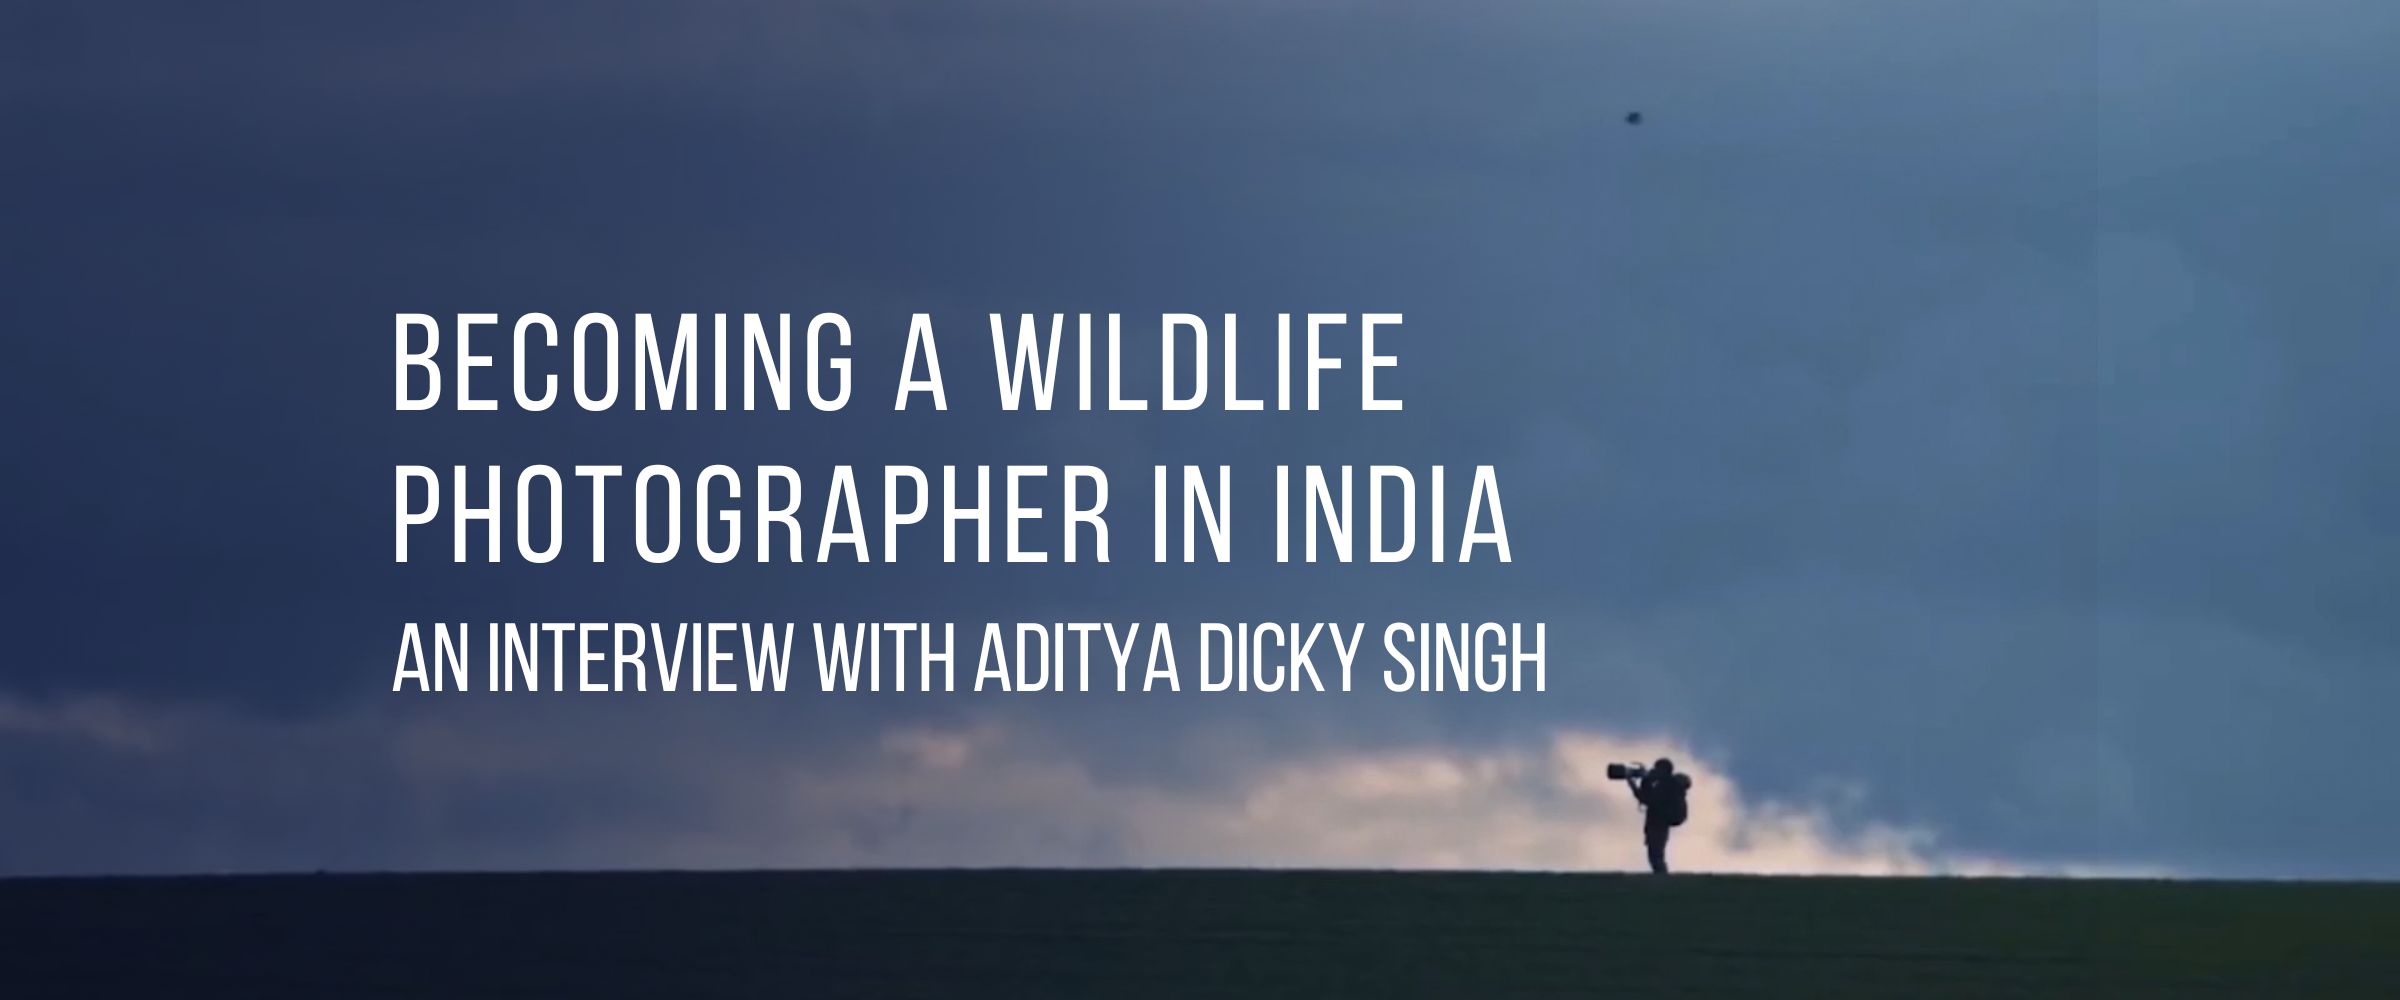 Becoming a Wildlife Photographer in India